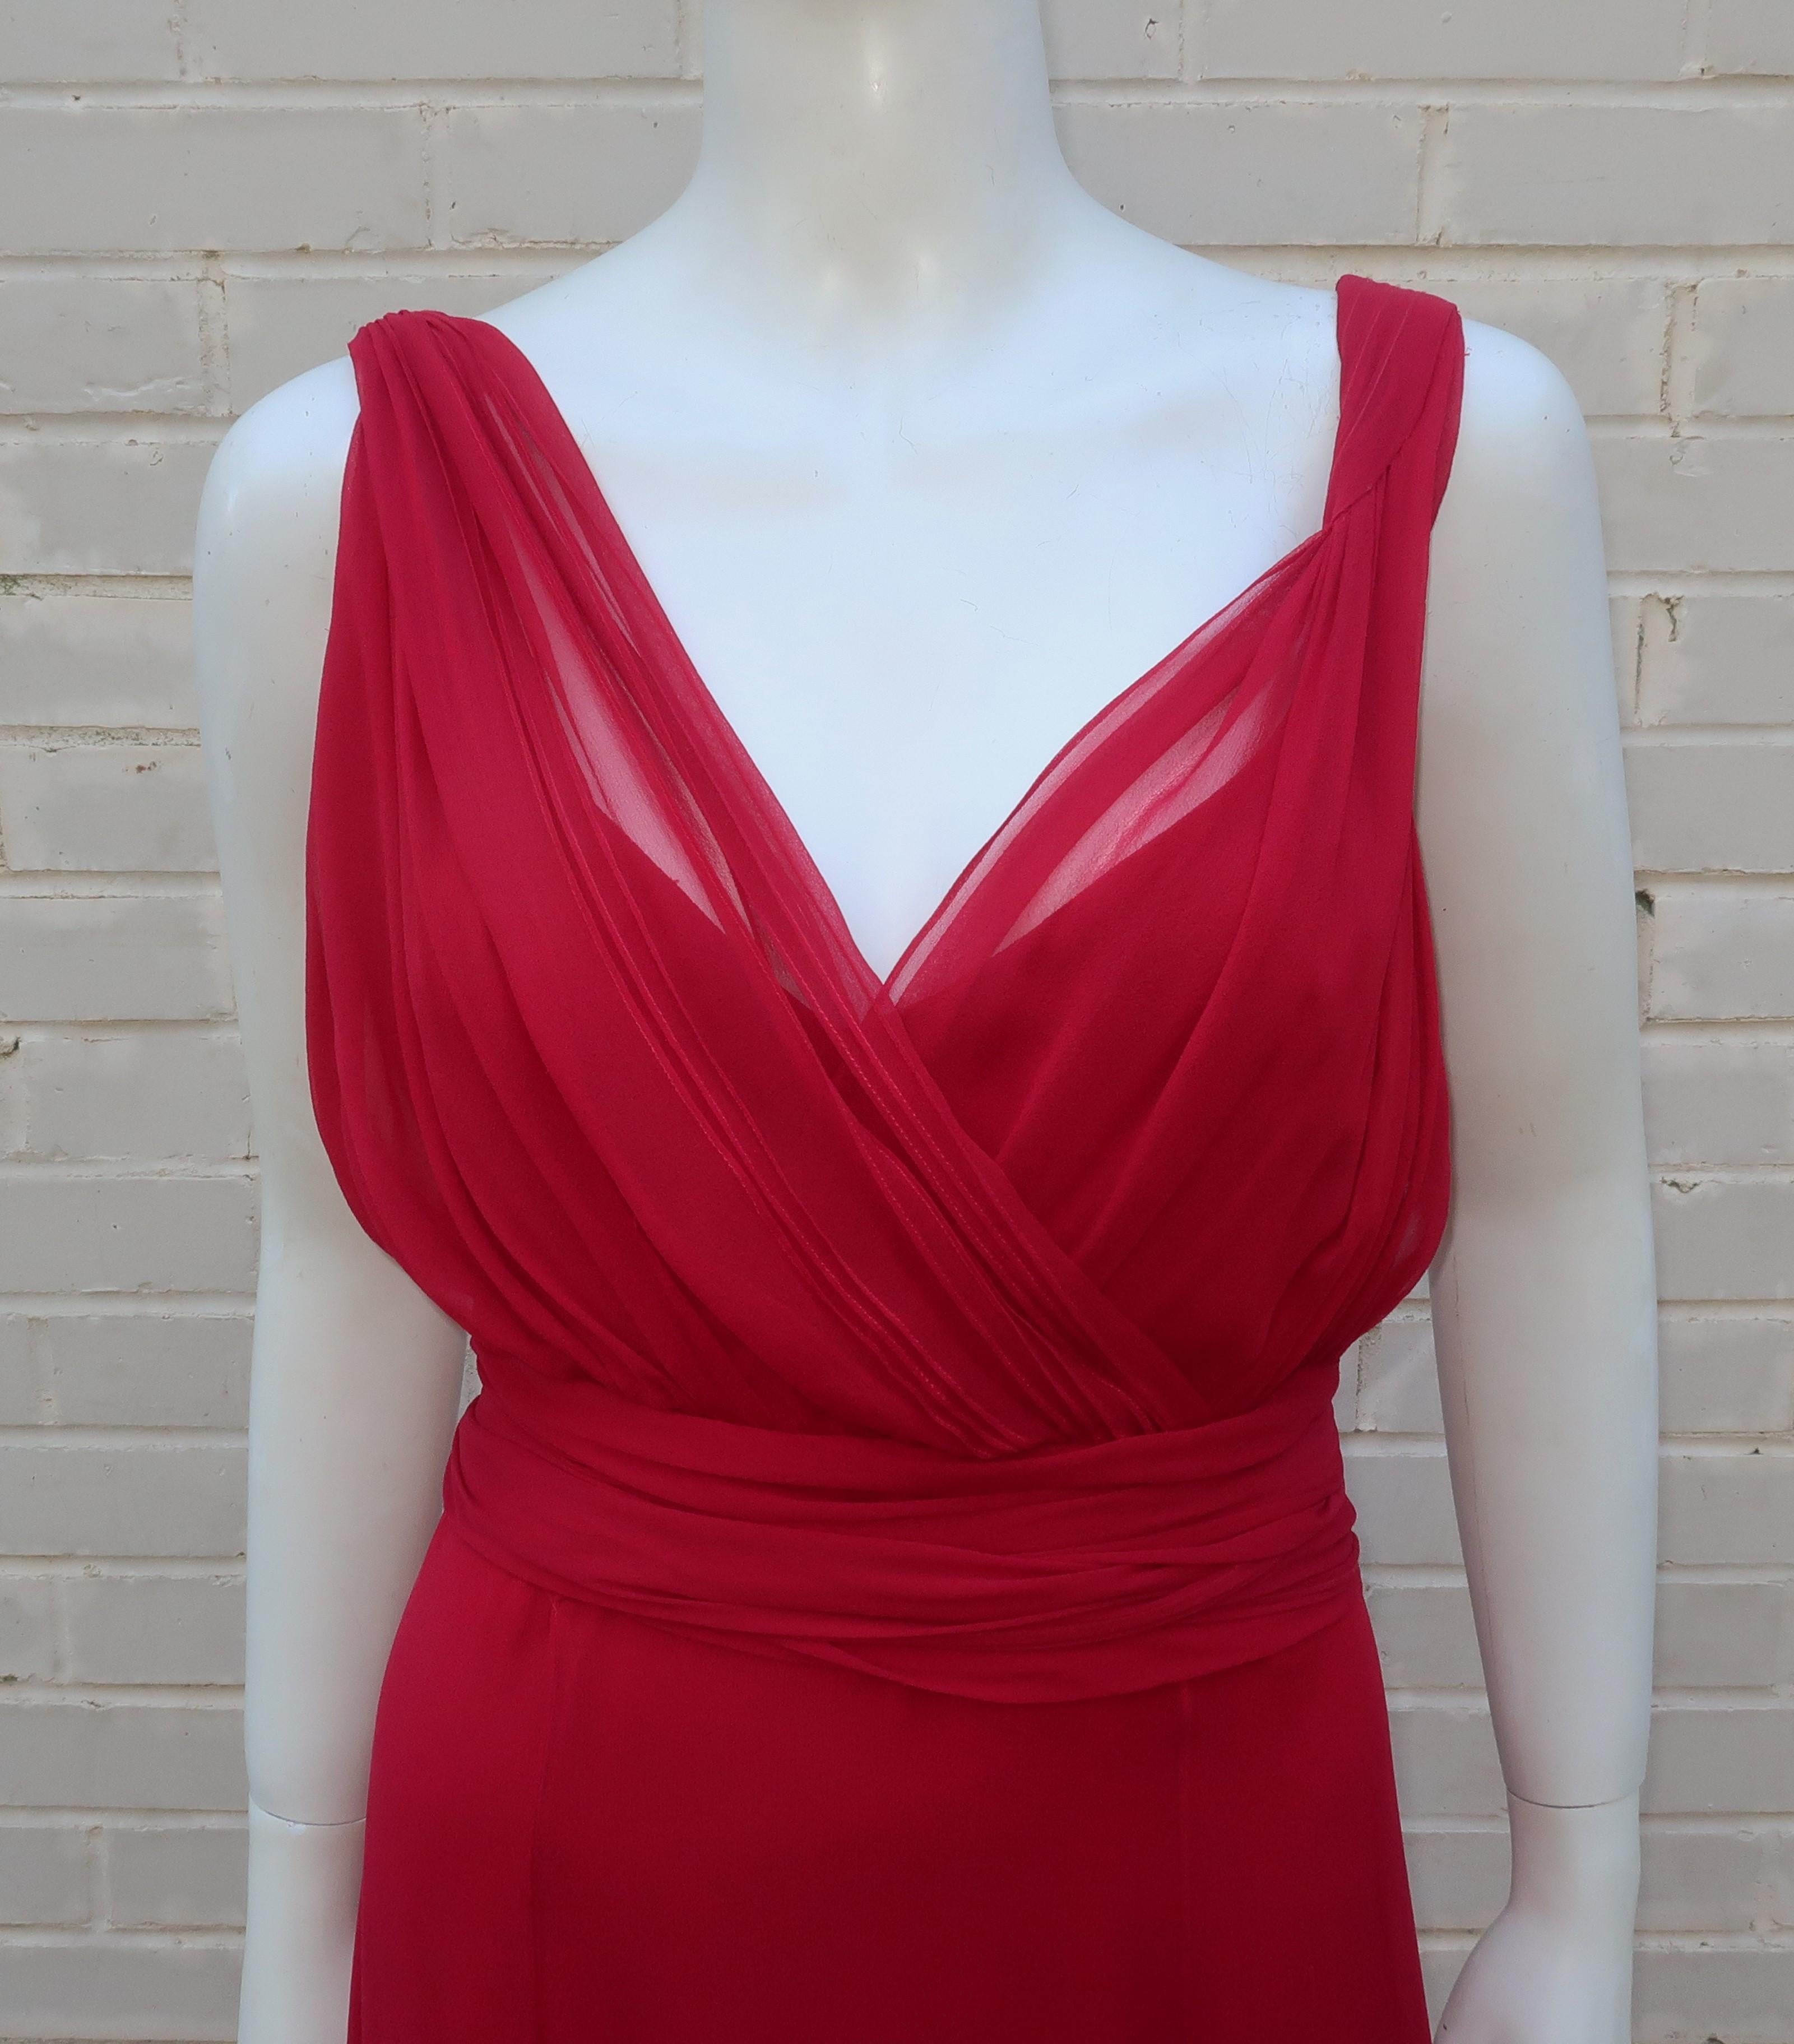 This Monique Lhuillier dress is a gorgeous goddess silhouette fabricated from three layers of dark cherry red silk chiffon.  The expert draping creates an ethereal look and is reminiscent of the Grecian designs by Madame Gres and Jean Desses from